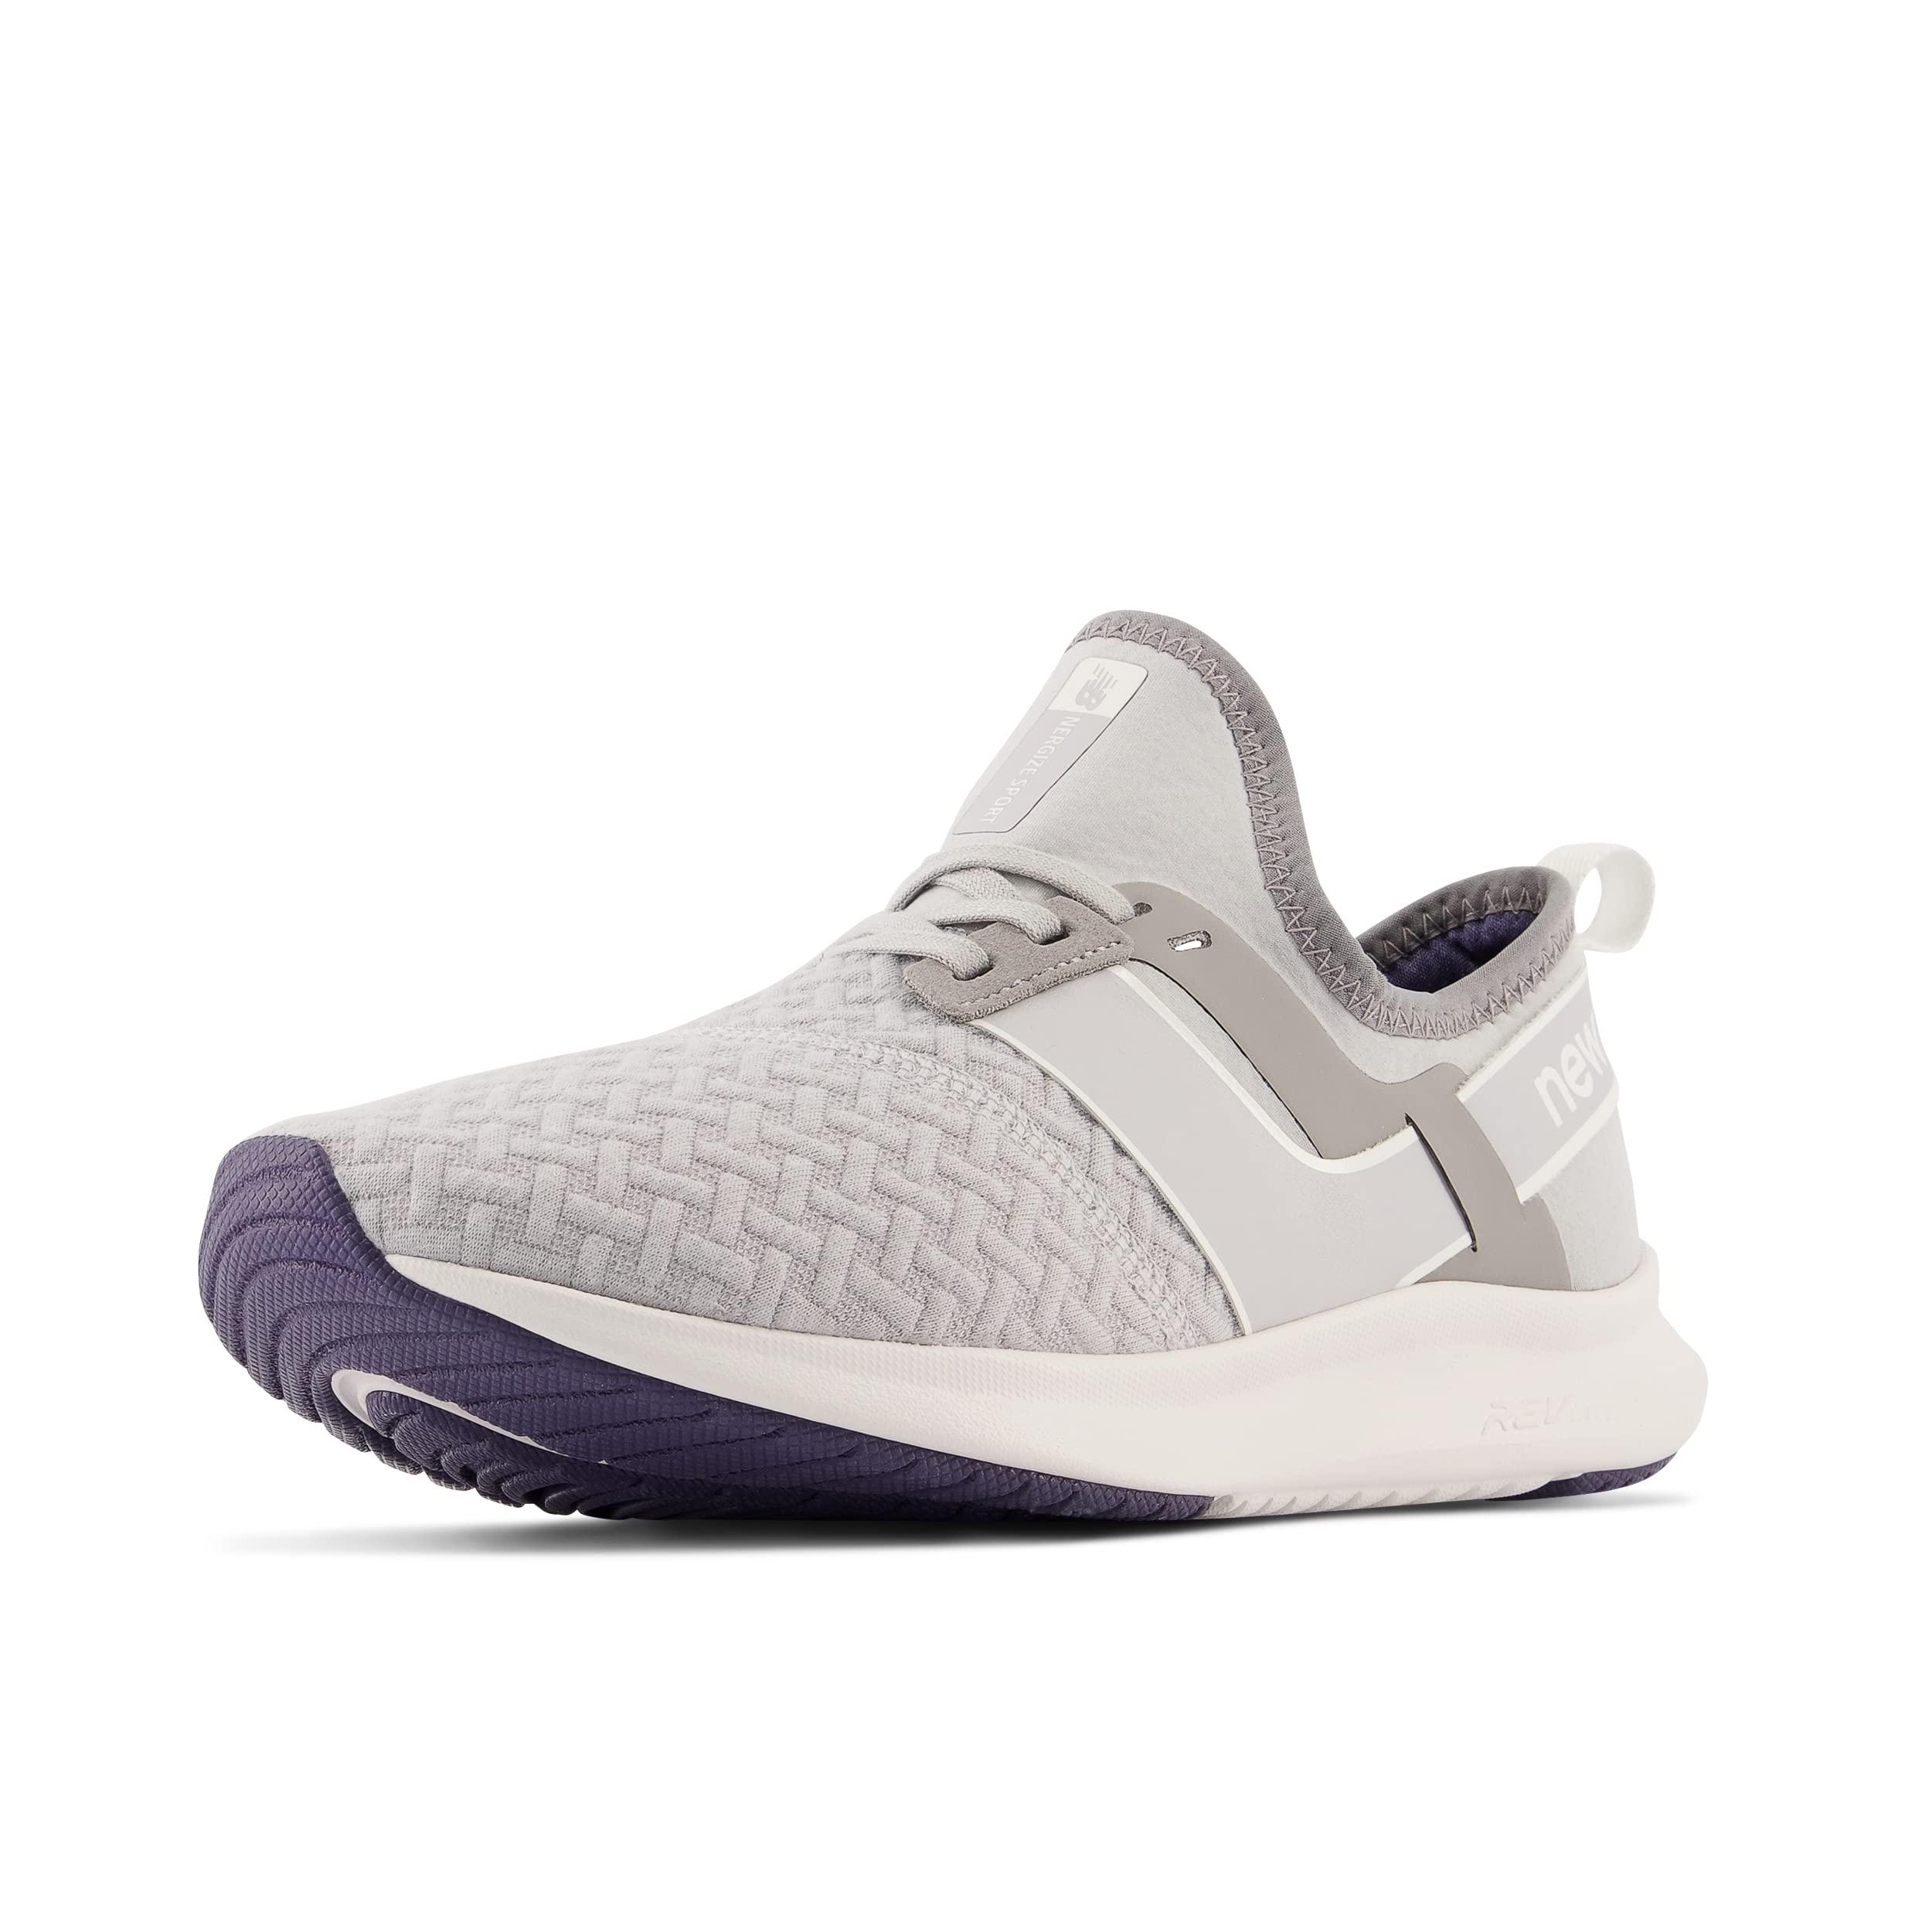 New Balance Fuelcore Nergize Sport V1 Sneaker in White | Lyst